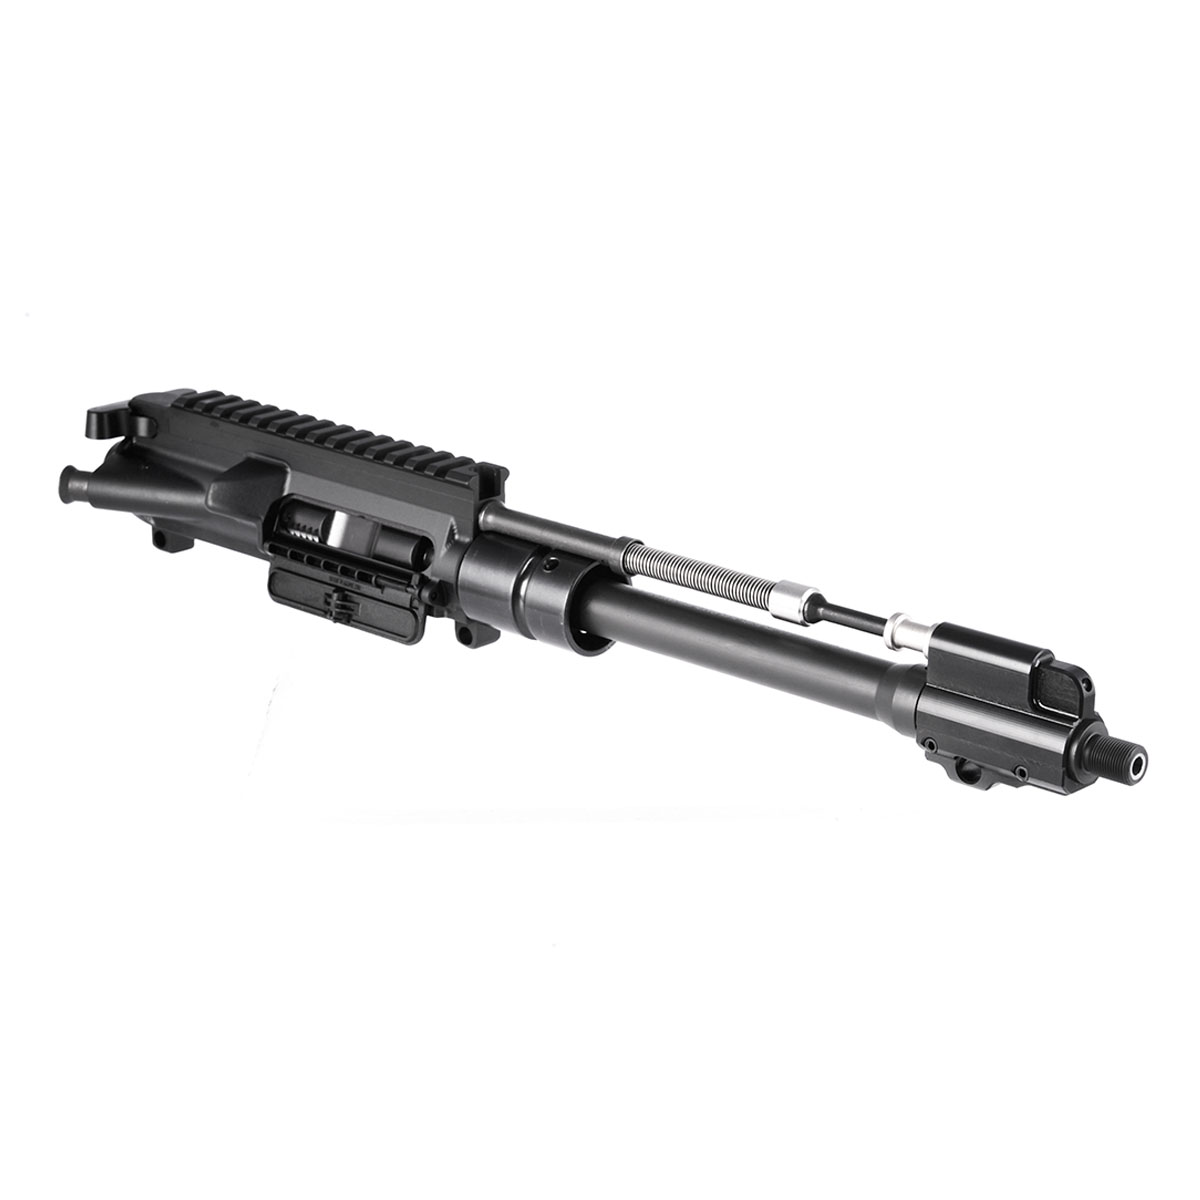 BROWNELLS - BRN-4® UPPER RECEIVER ASSEMBLIES WITH CHROME LINED BARRELS